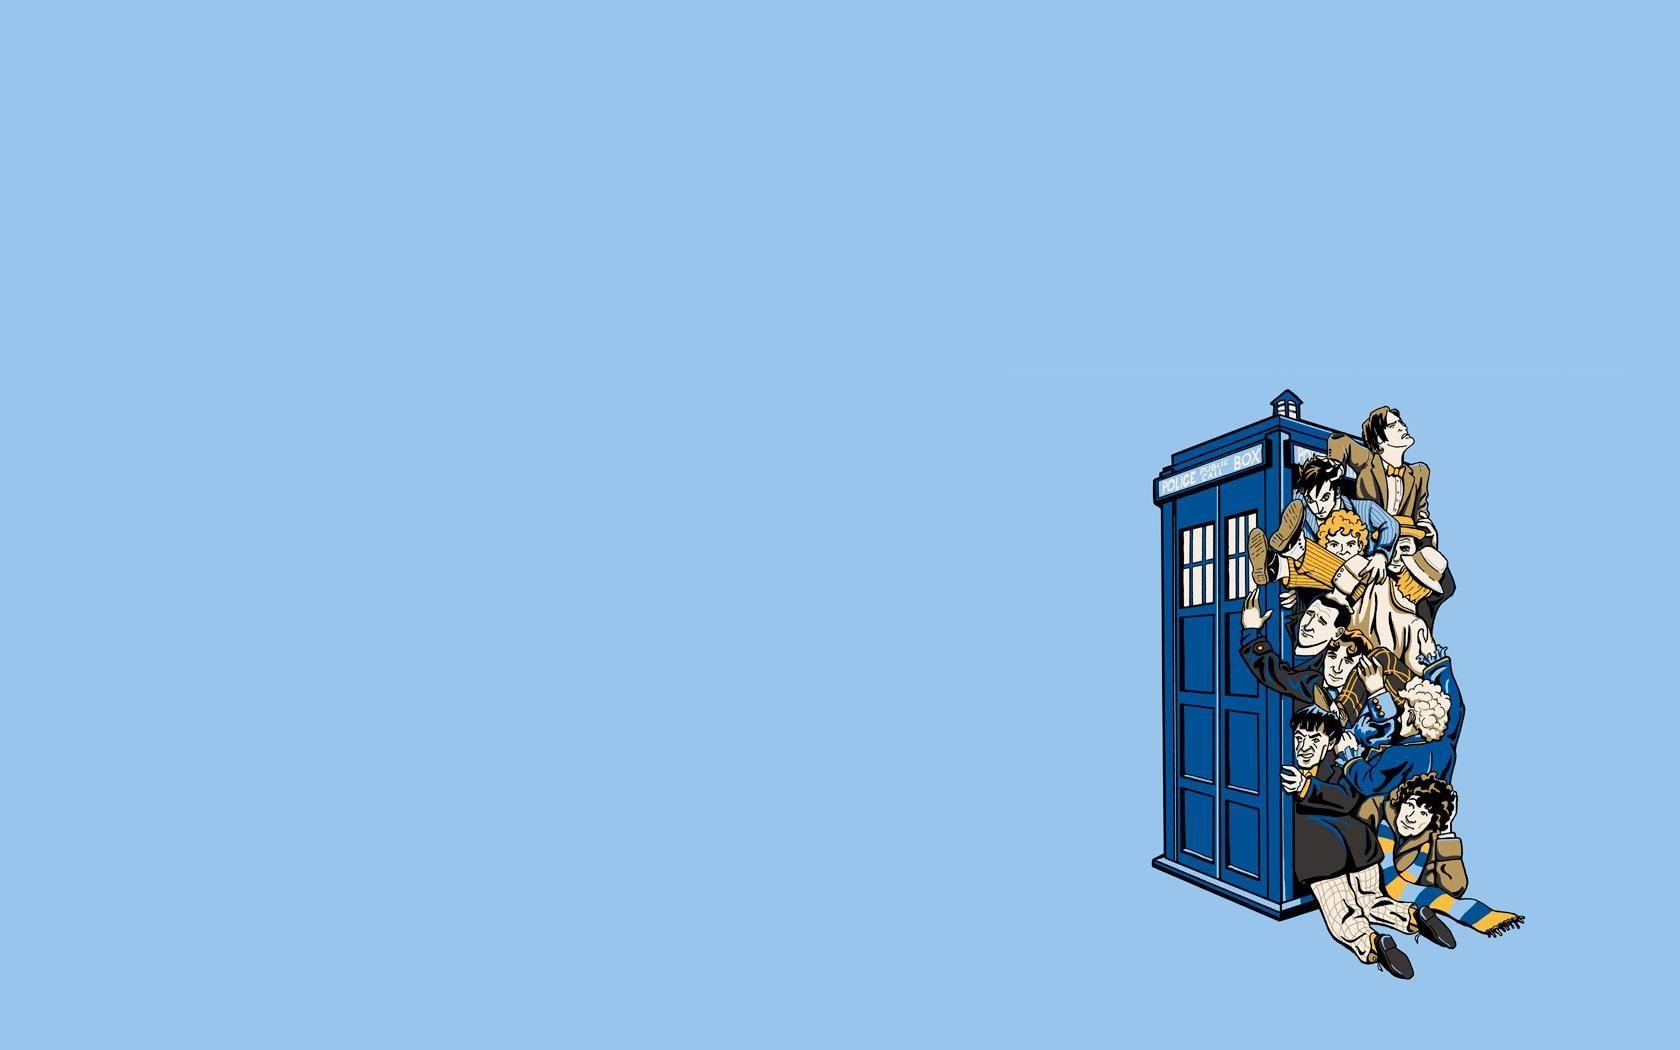 High Definition Collection: Doctor Who Wallpaper, 40 Full HD Doctor